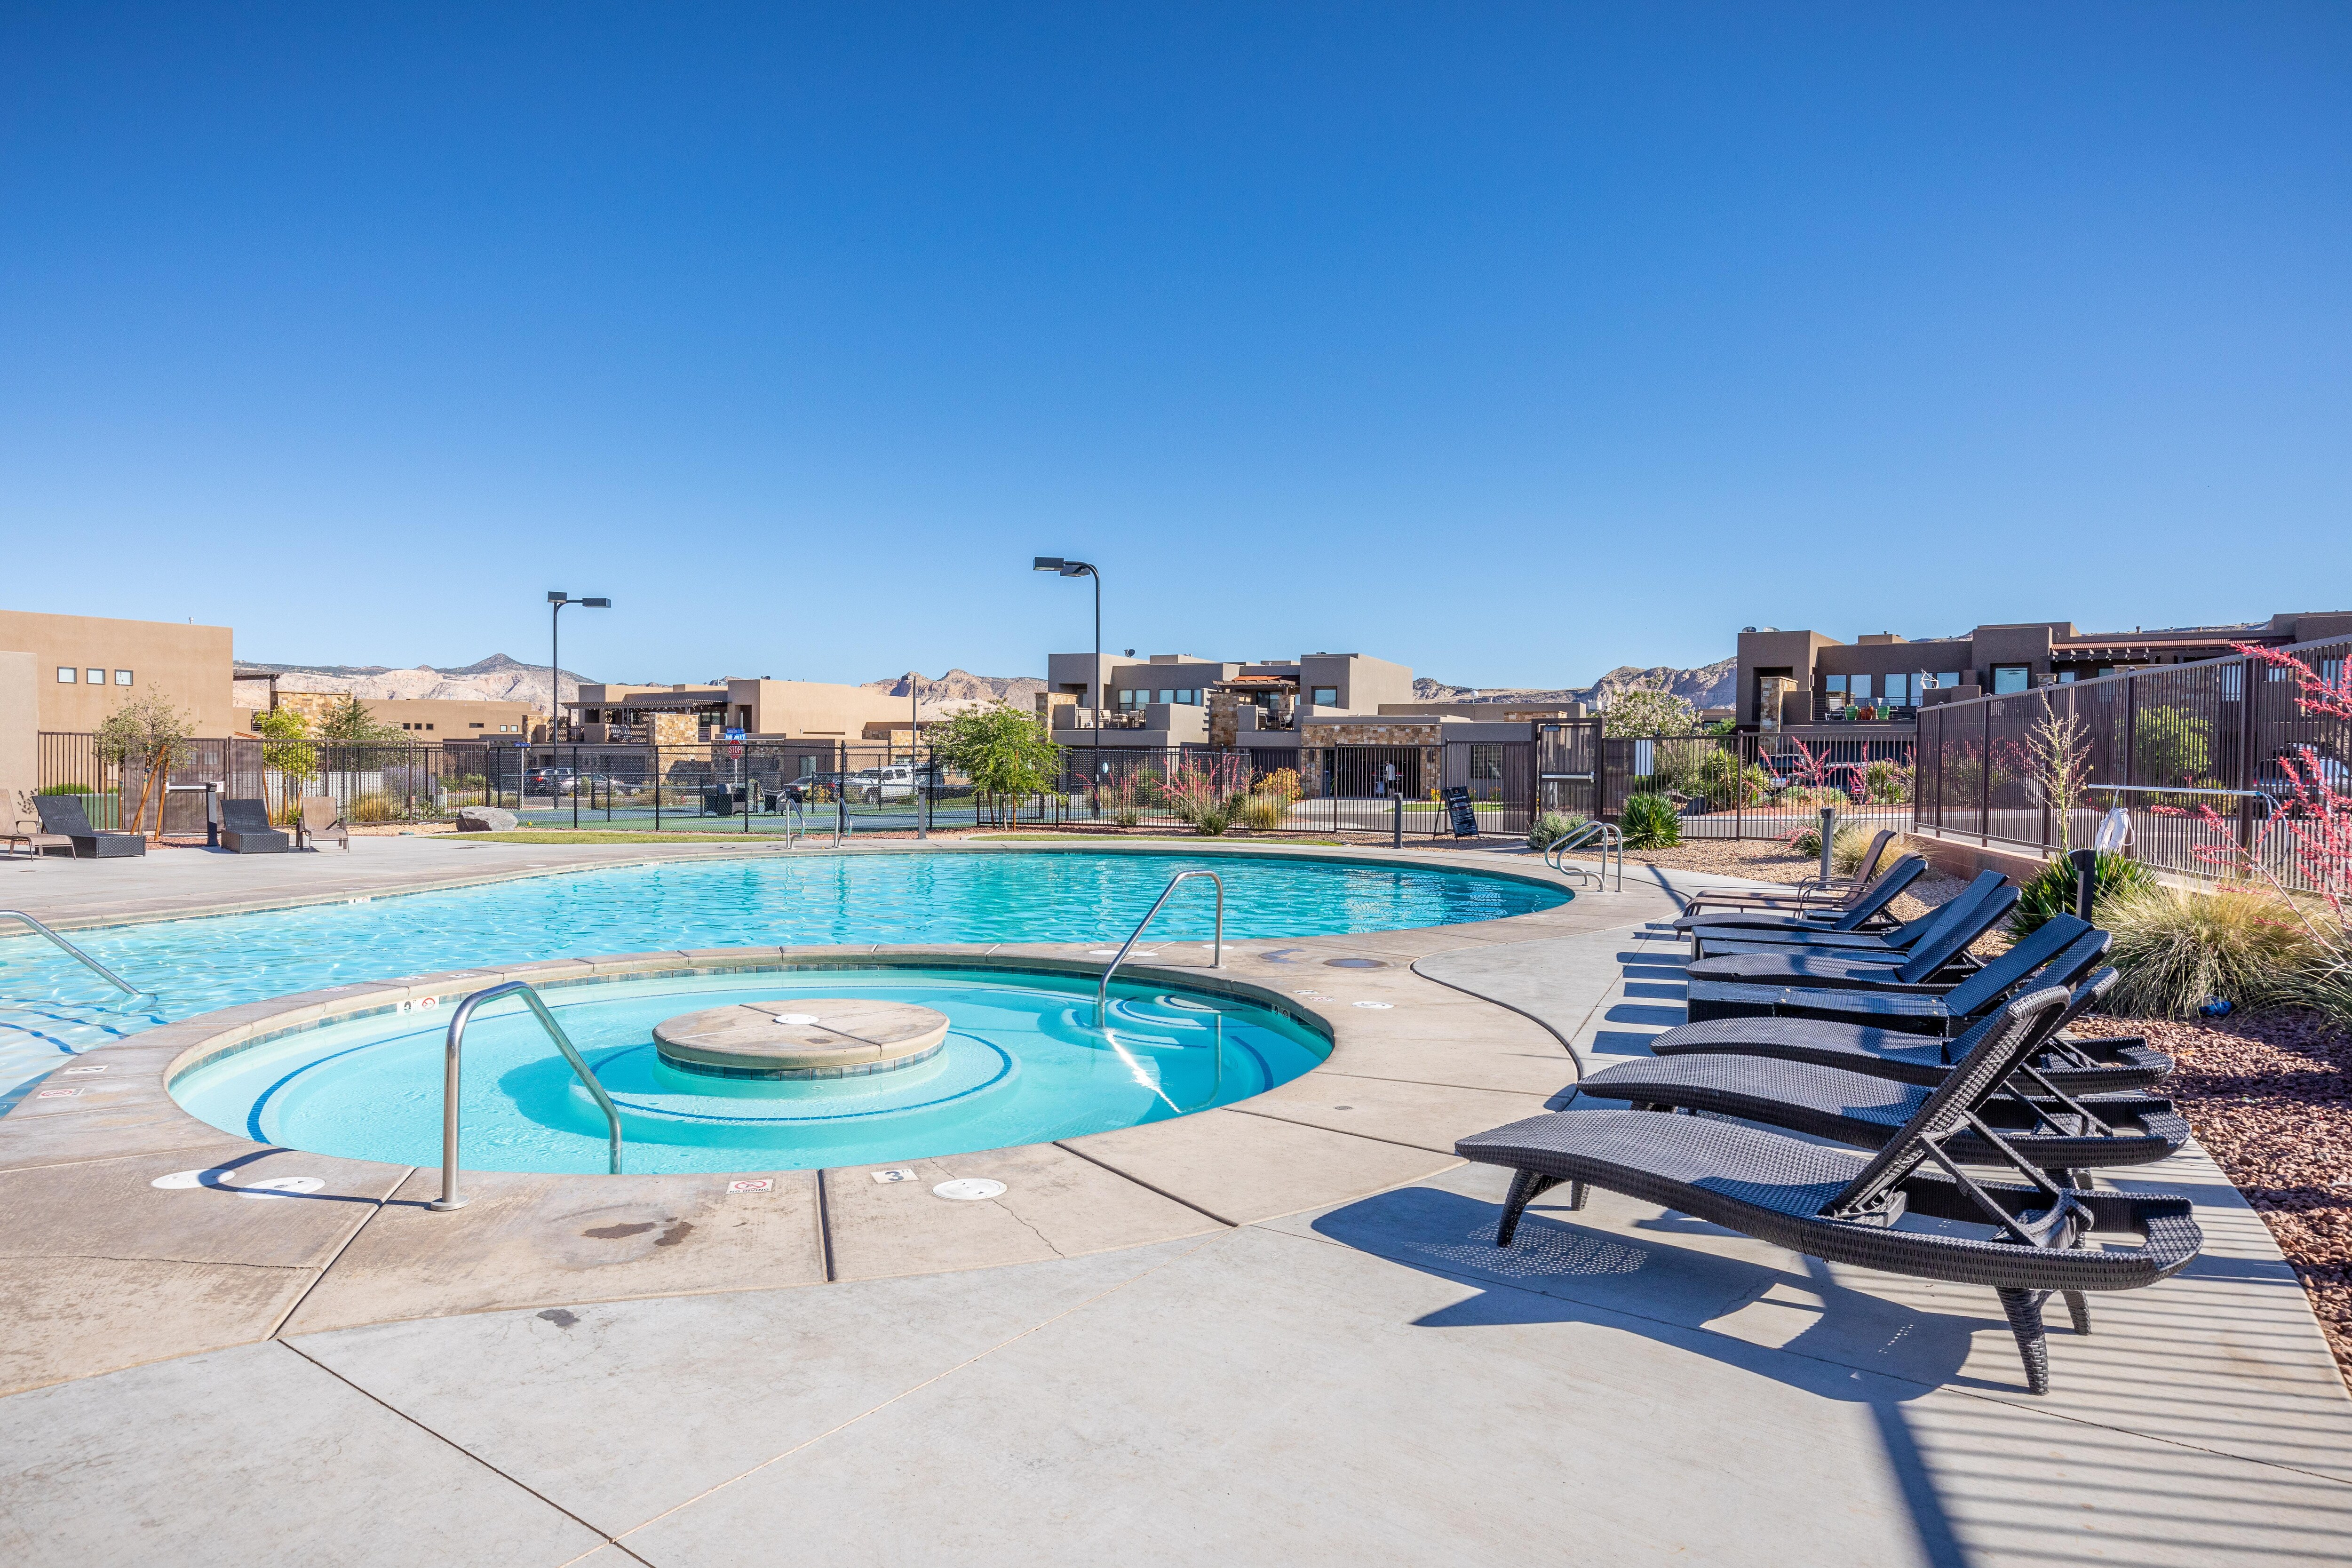 Relax in the oversized community hot tub that is open and heated year-round.